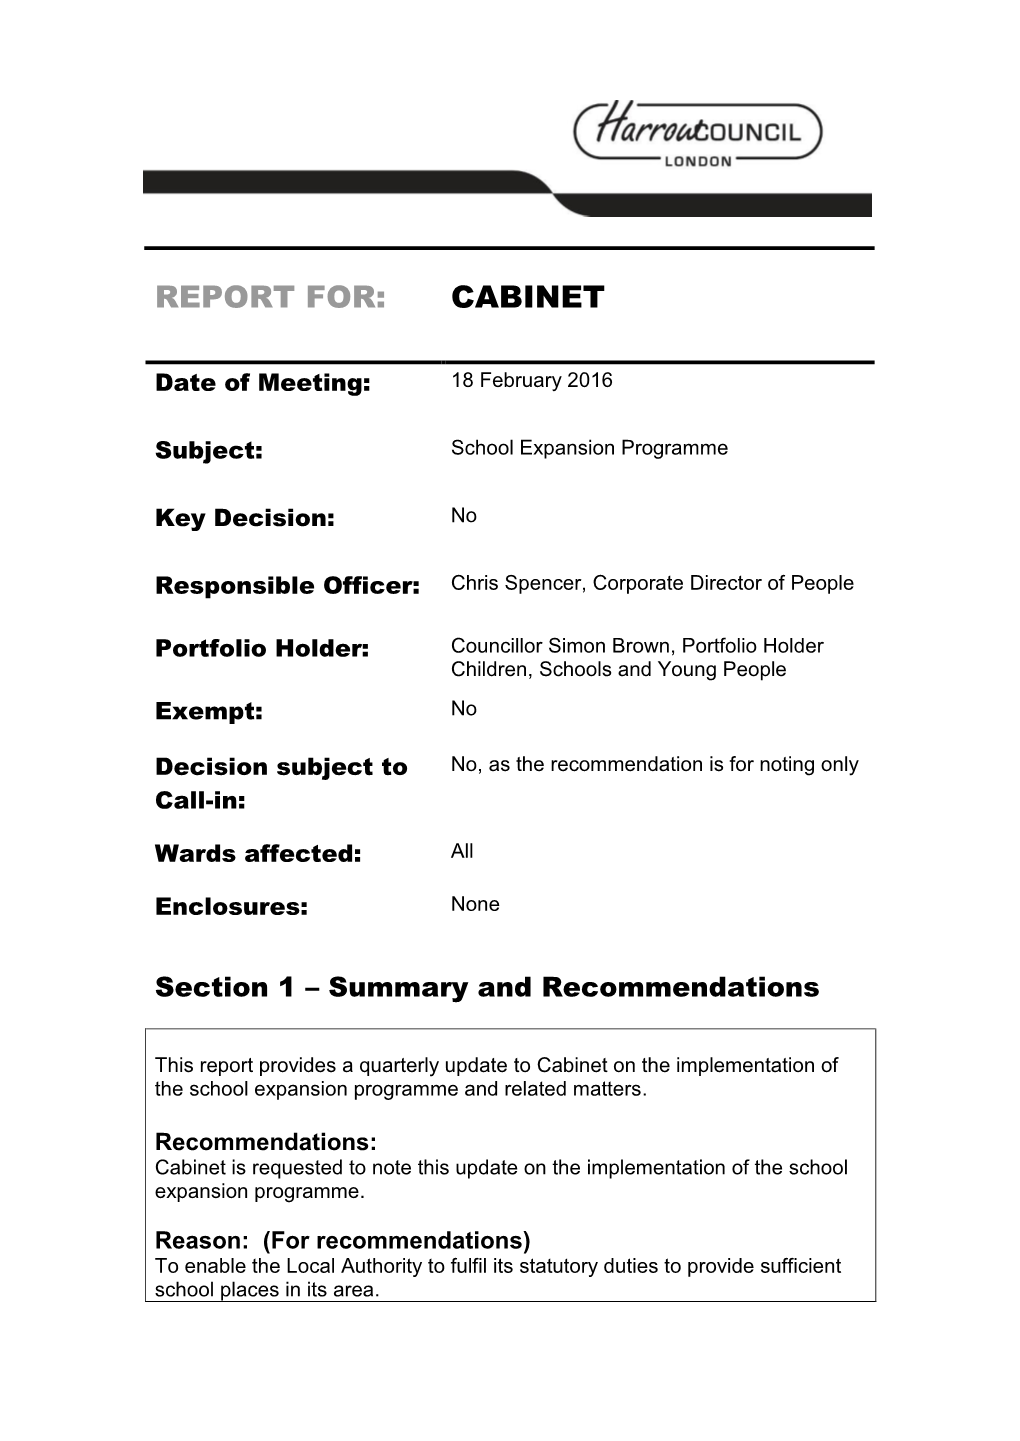 Report For: Cabinet